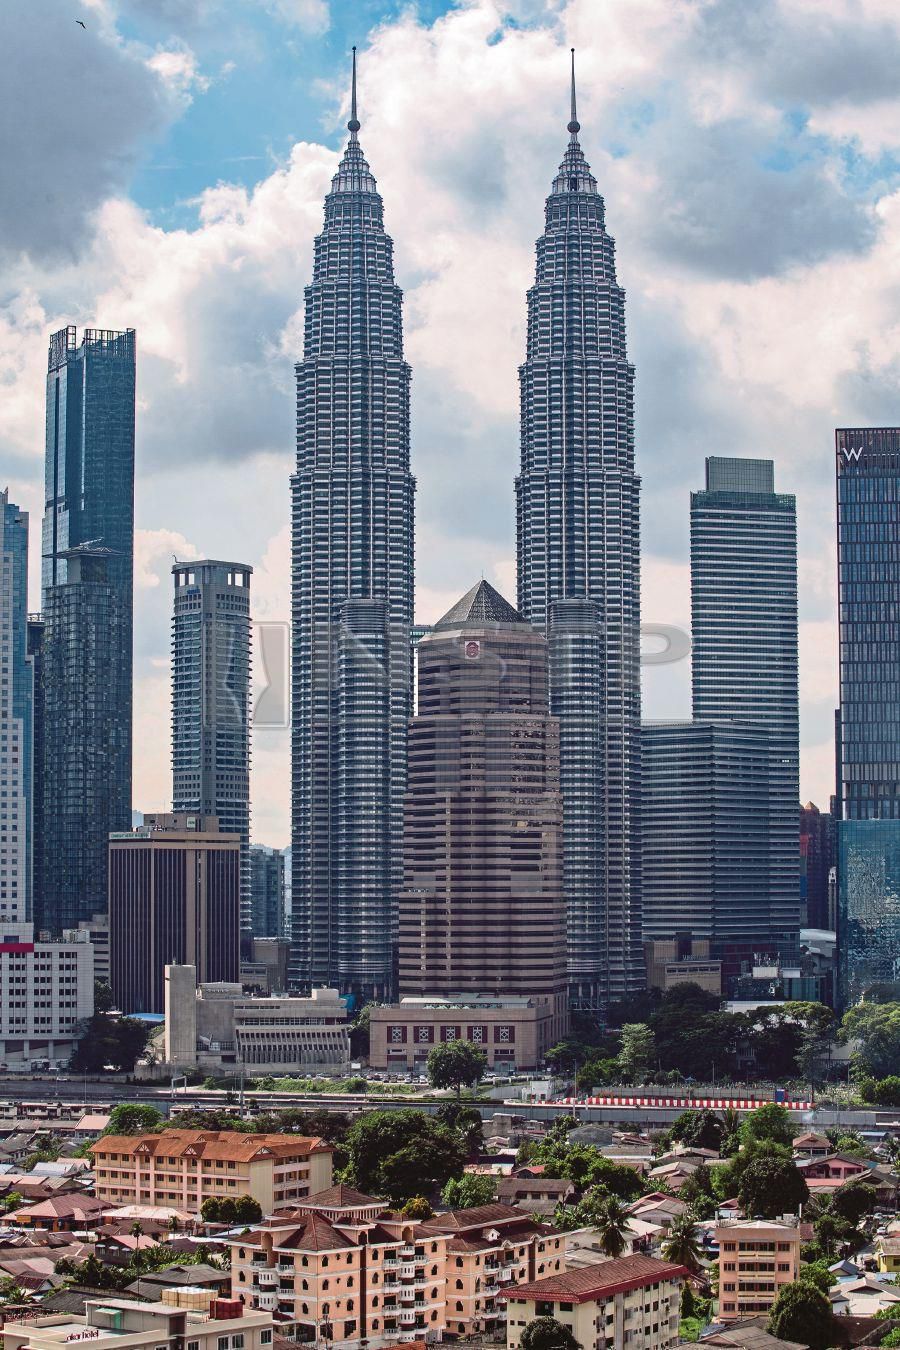 Petronas is an international business concern, with a presence in some of the more lucrative petroleum areas of the world. We sometimes fail to realise just how big Petronas is.